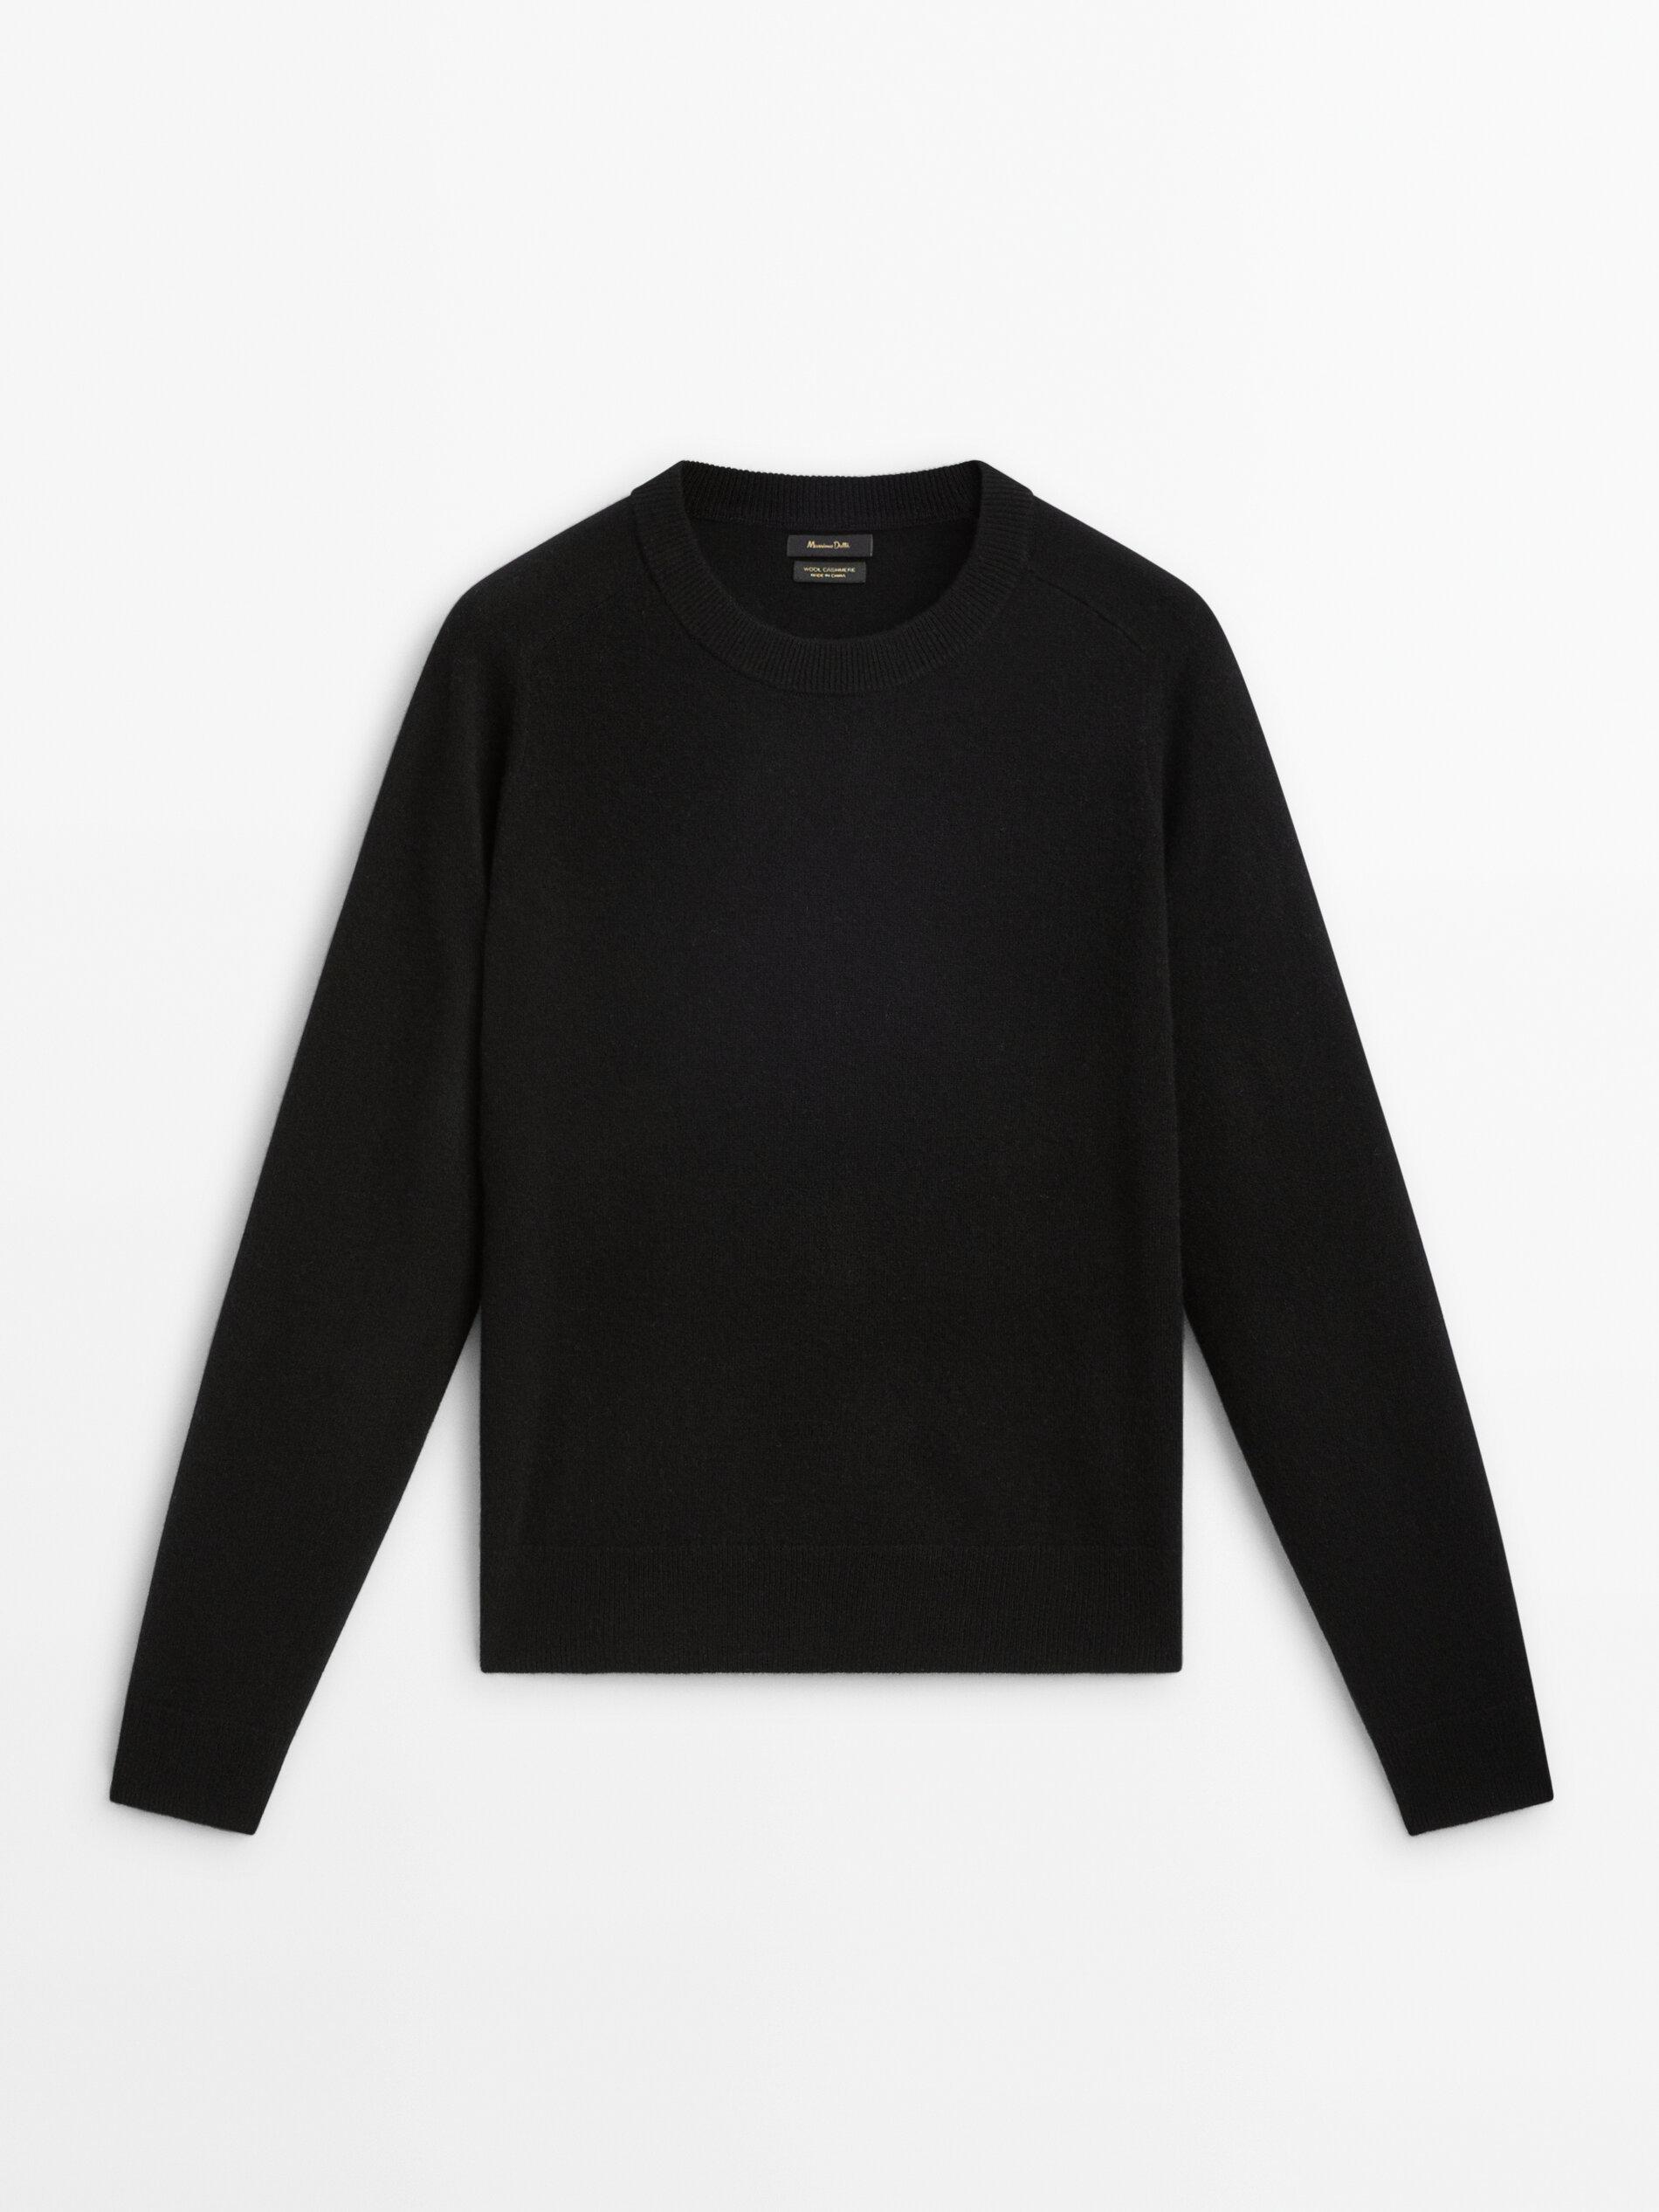 MASSIMO DUTTI Wool And Cashmere Blend Round Neck Sweater in Black | Lyst